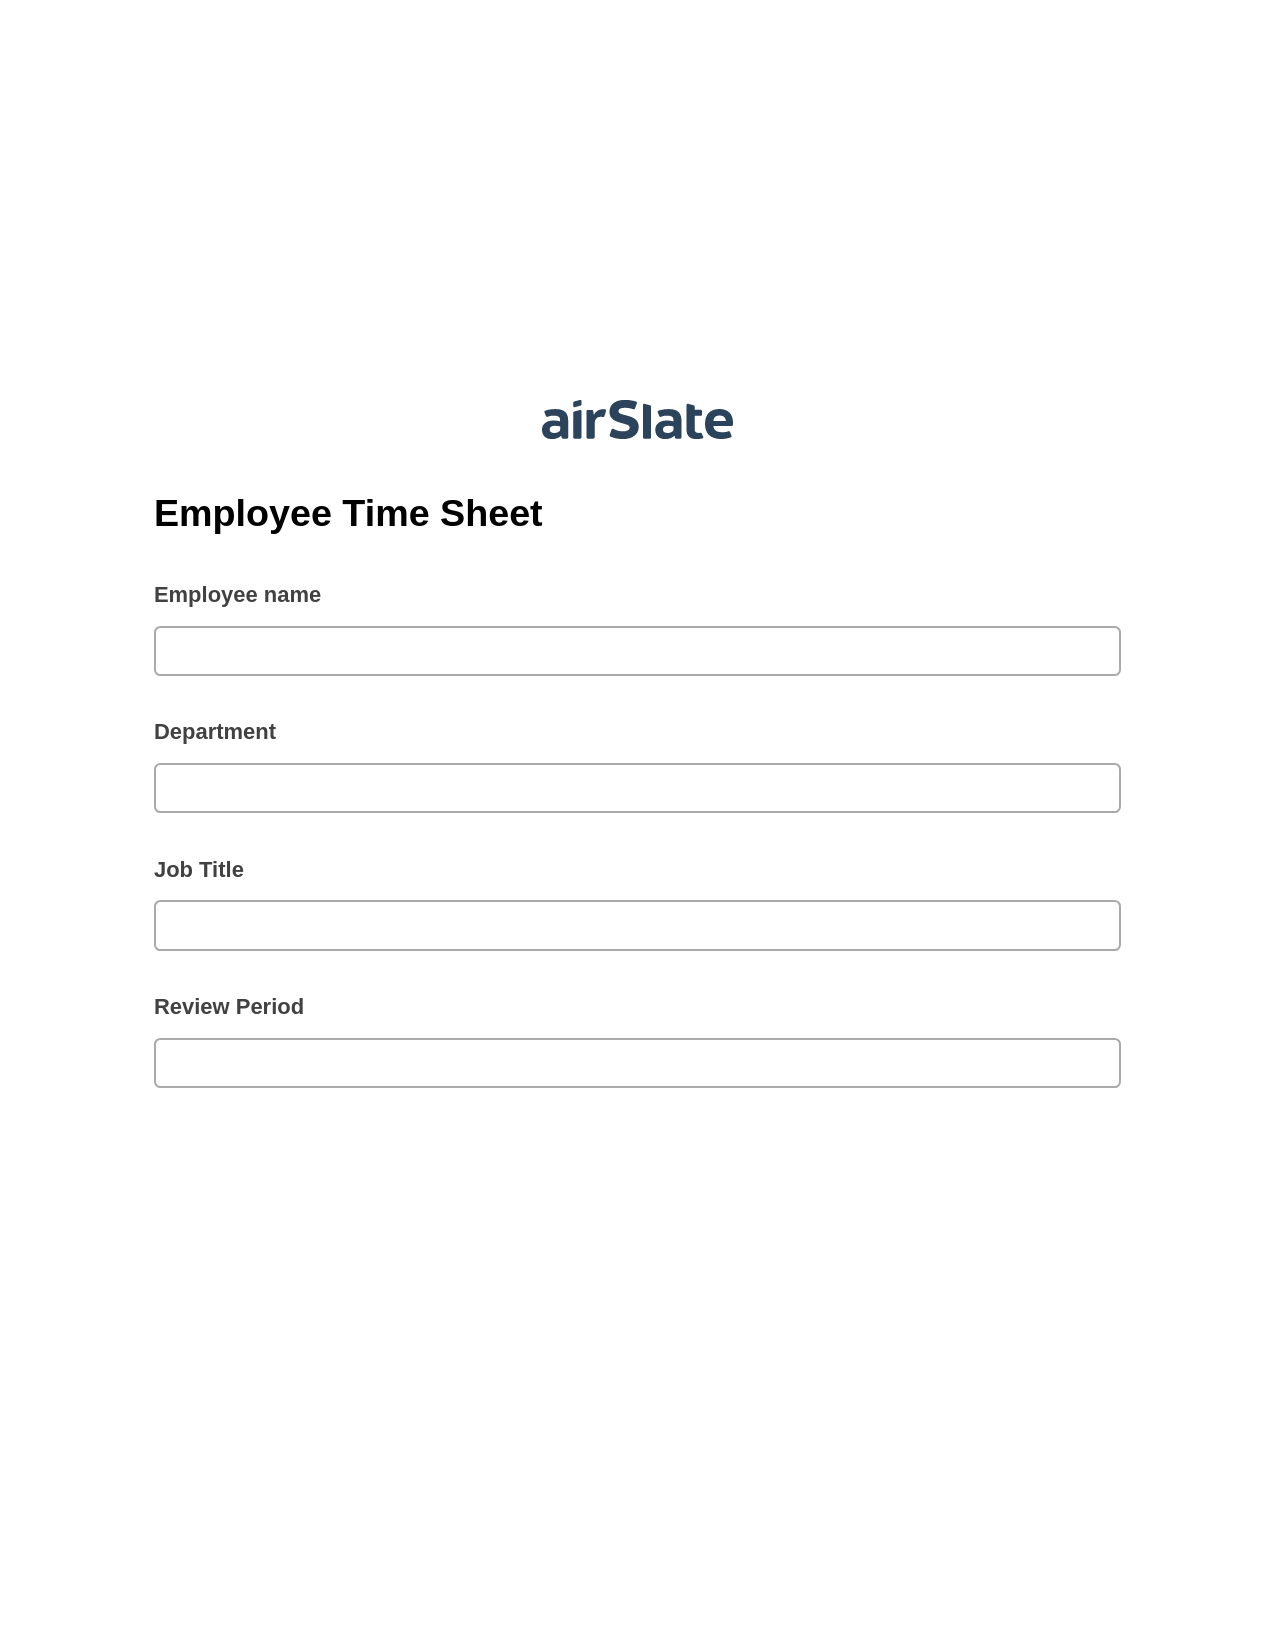 Multirole Employee Time Sheet Pre-fill from CSV File Bot, Create Salesforce Records Bot, Export to Smartsheet